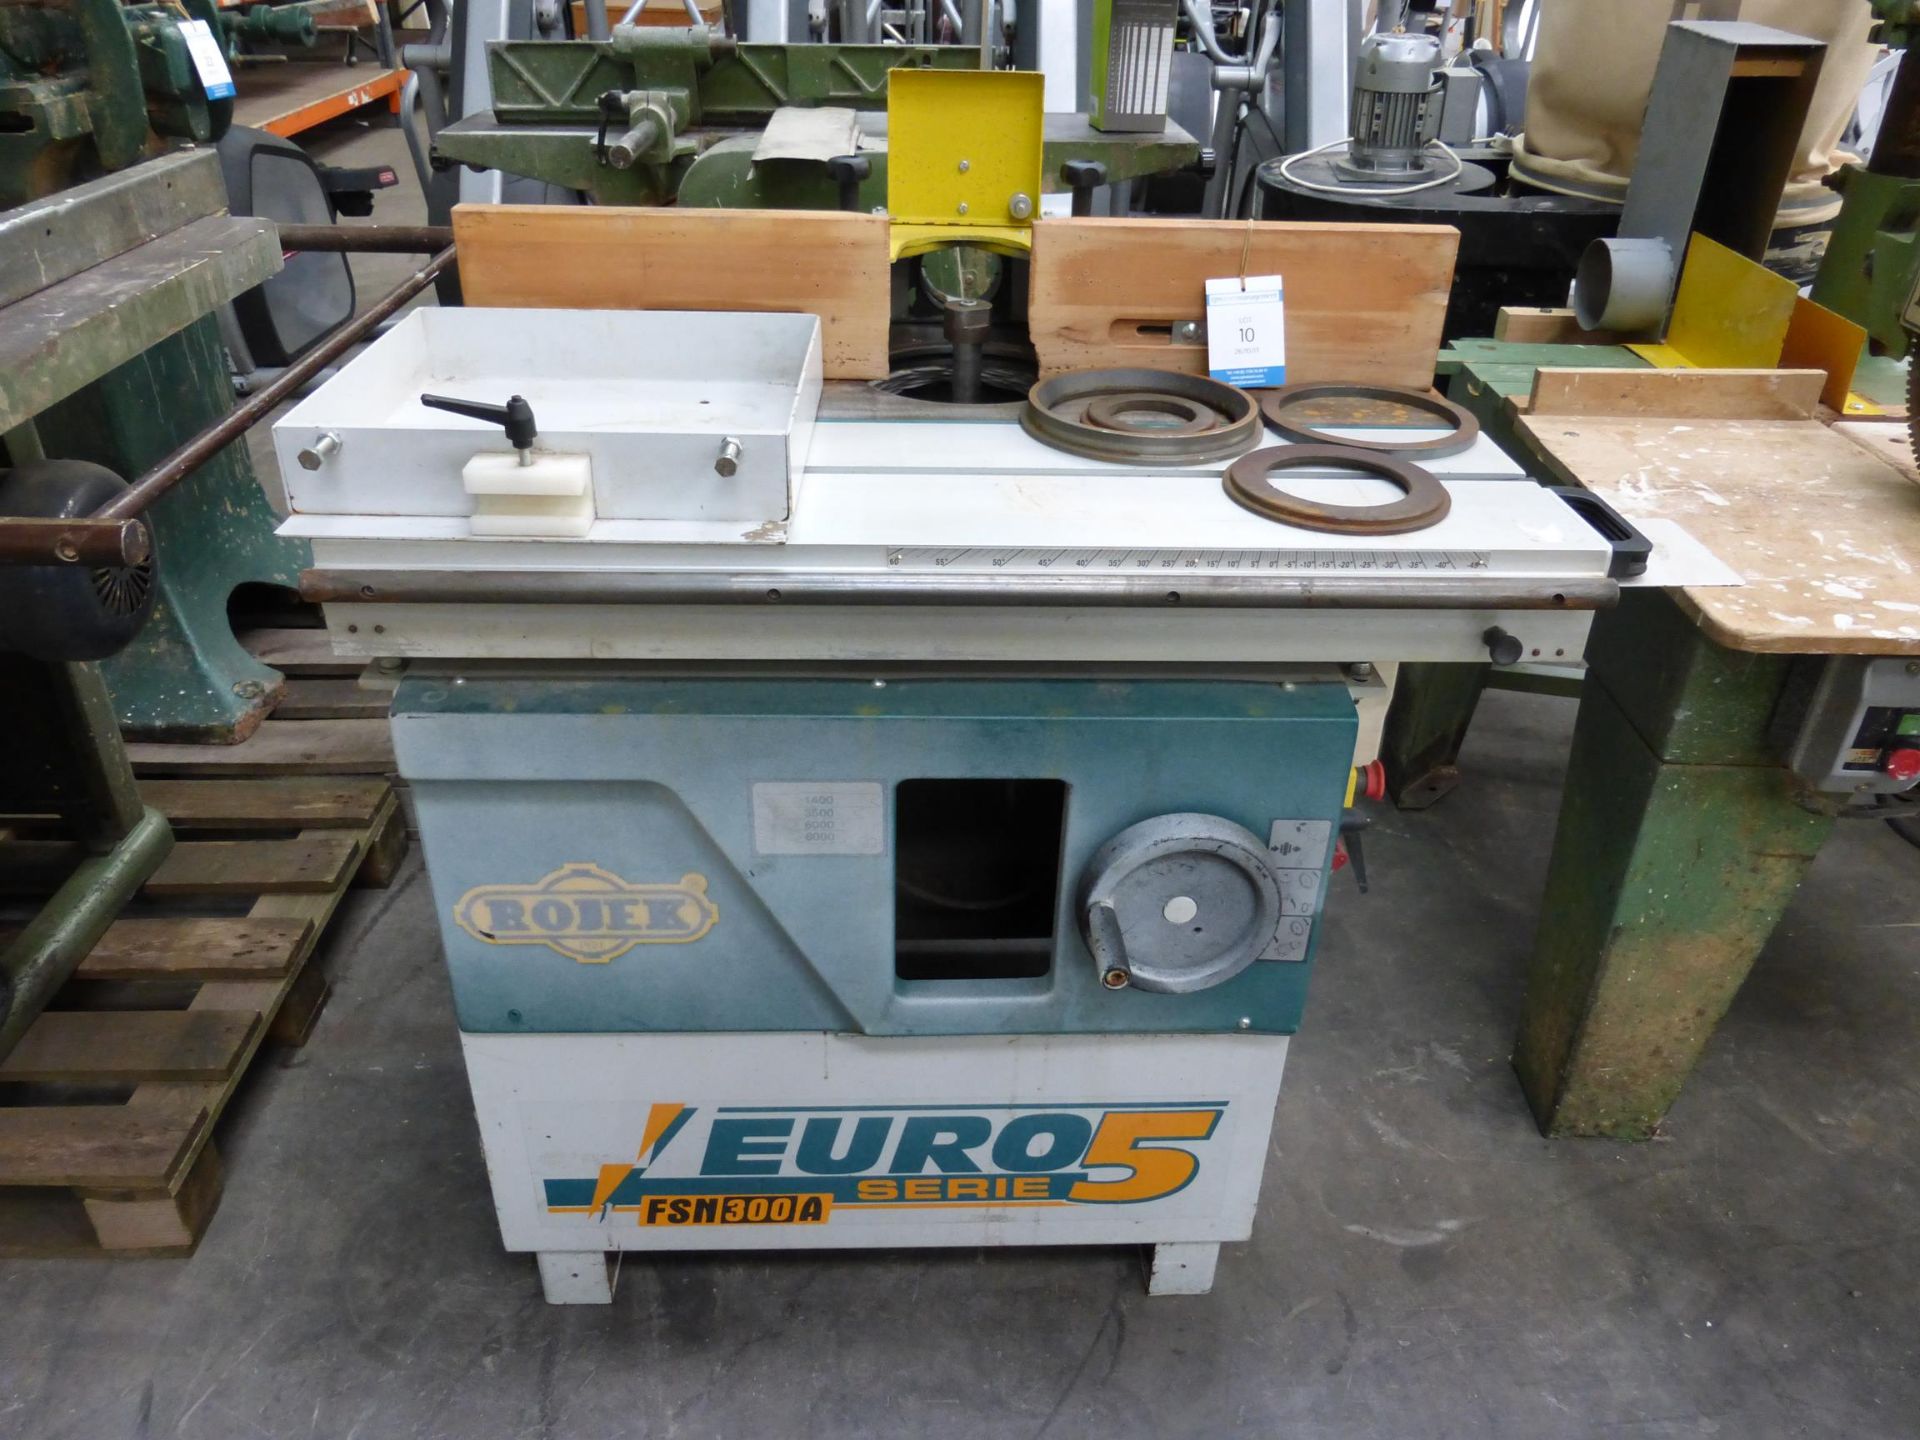 * A Rojex Euro FSN 300A Series 5, 4 Speed Tilting Head Spindle Mounder and Sliding Table. Please